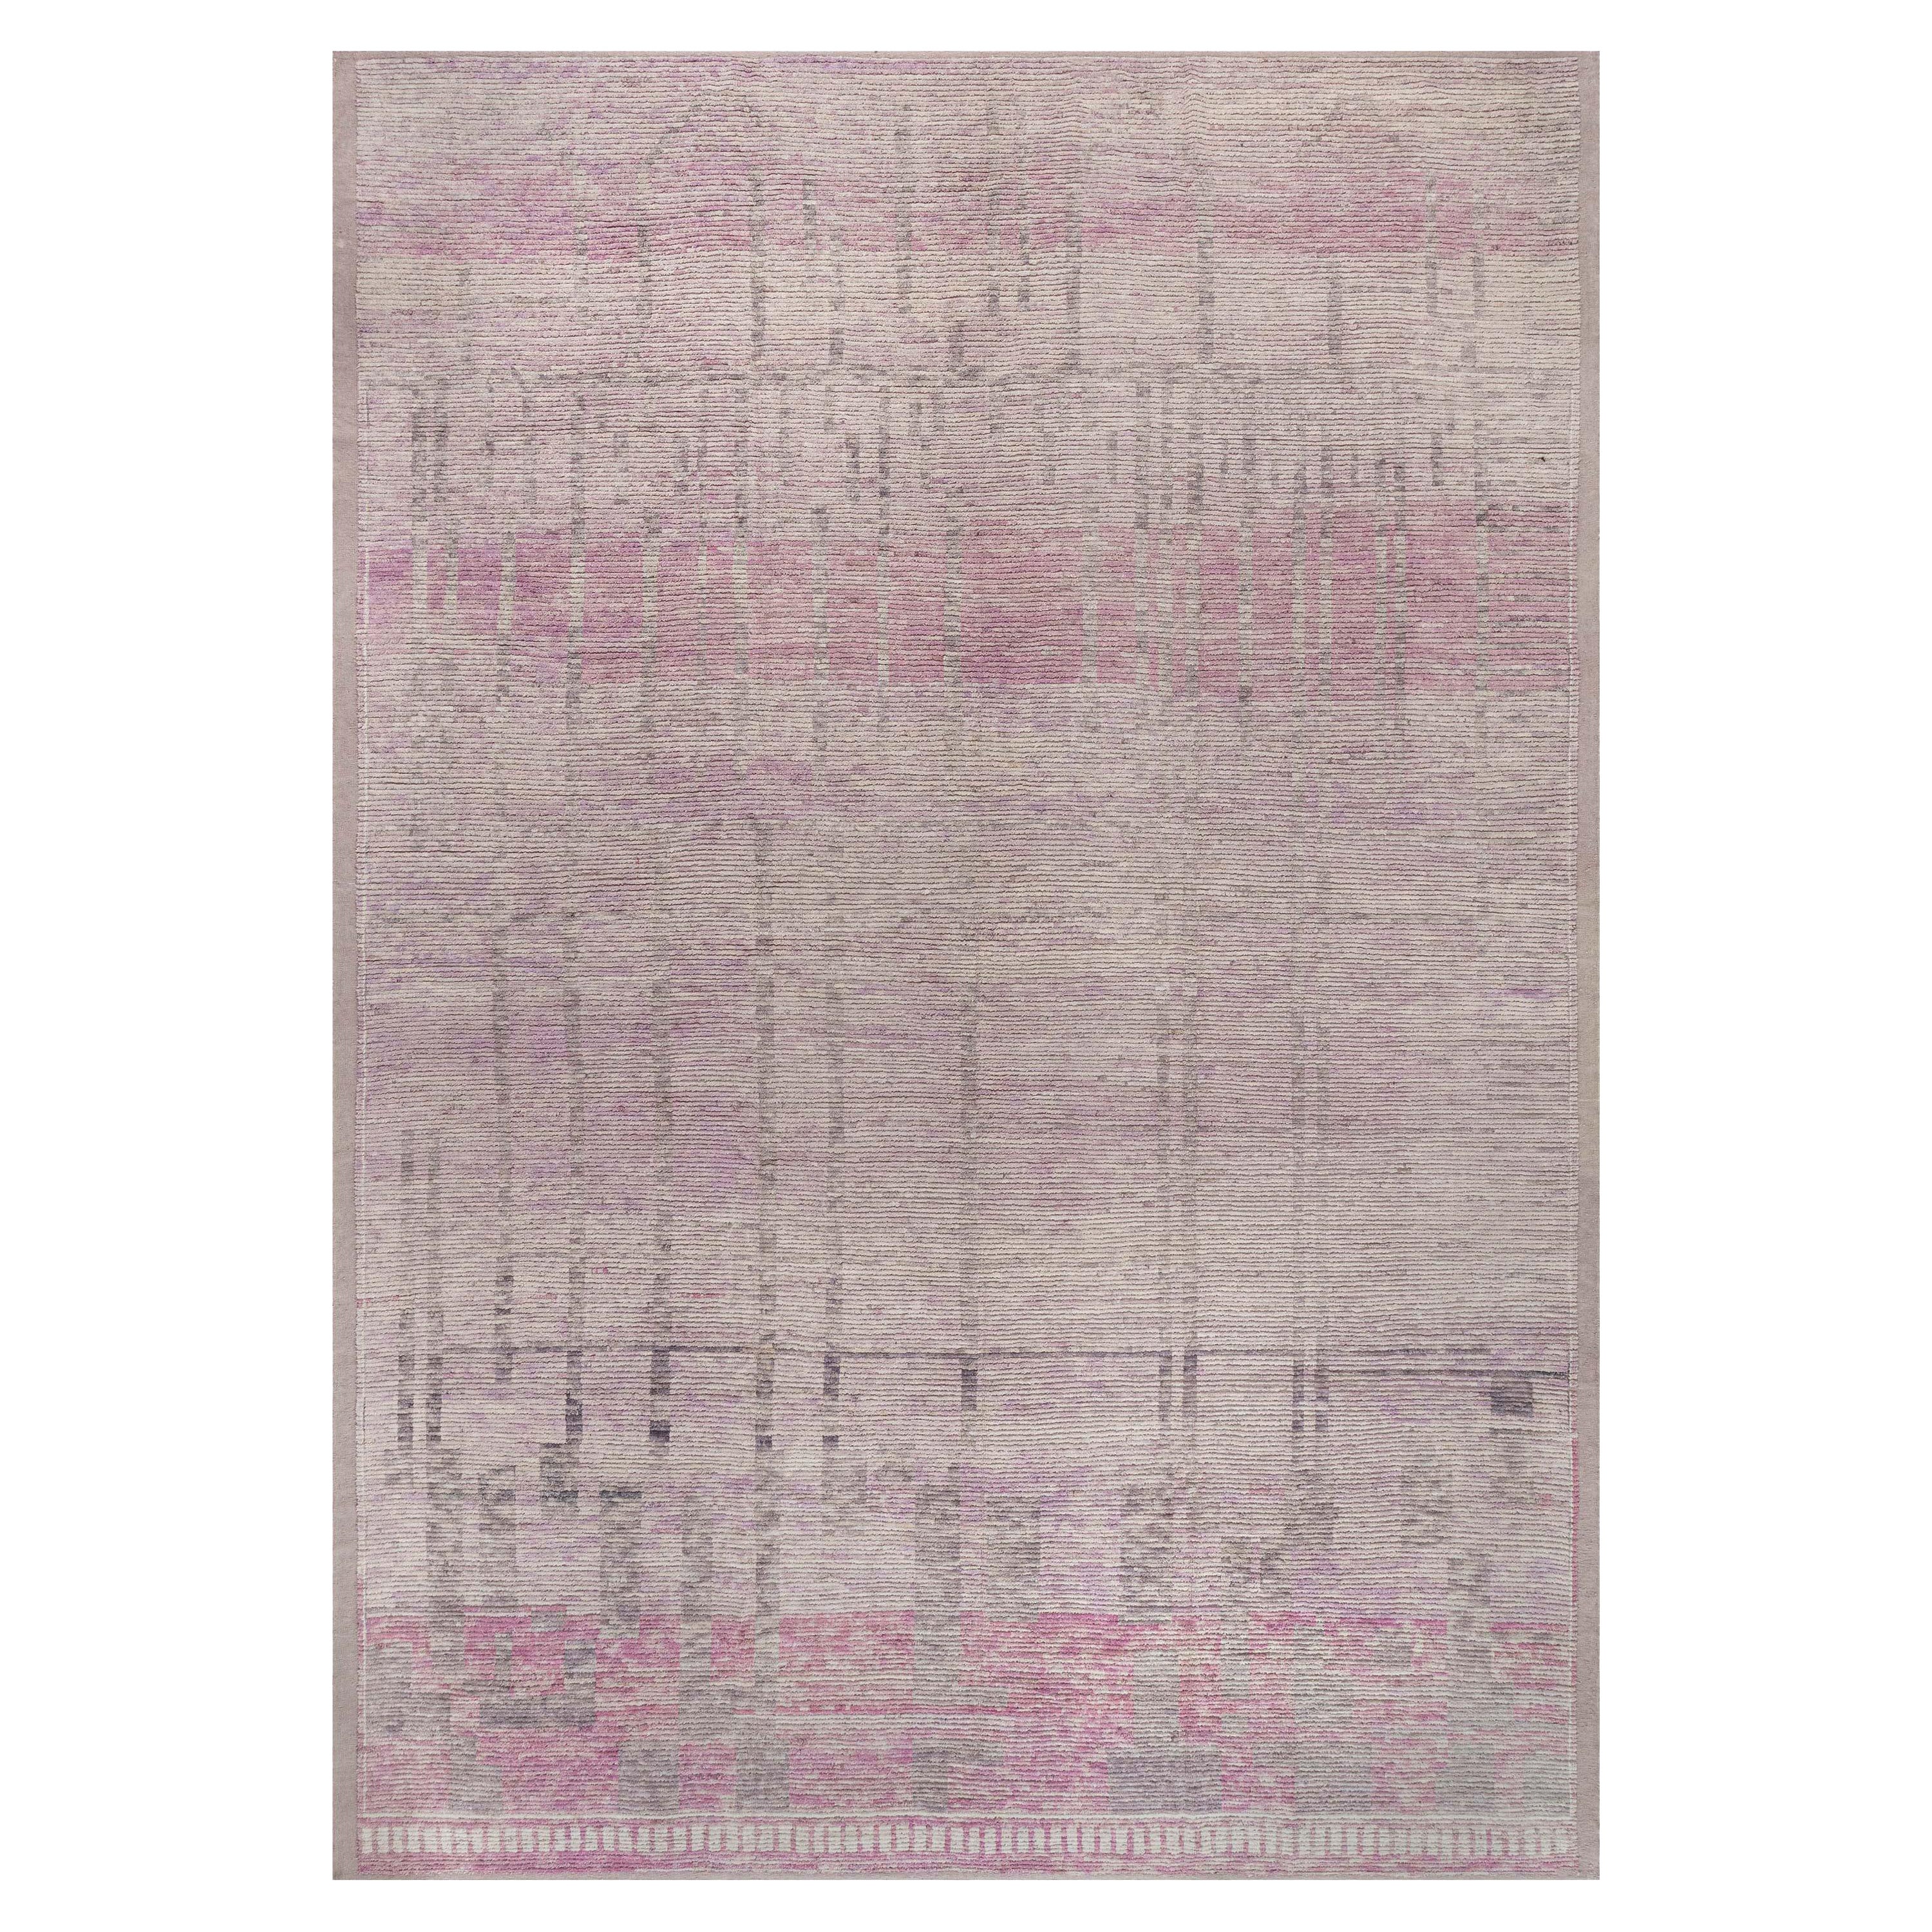 Tribal Style Moroccan Rug in Shades of Pink by Doris Leslie Blau For Sale